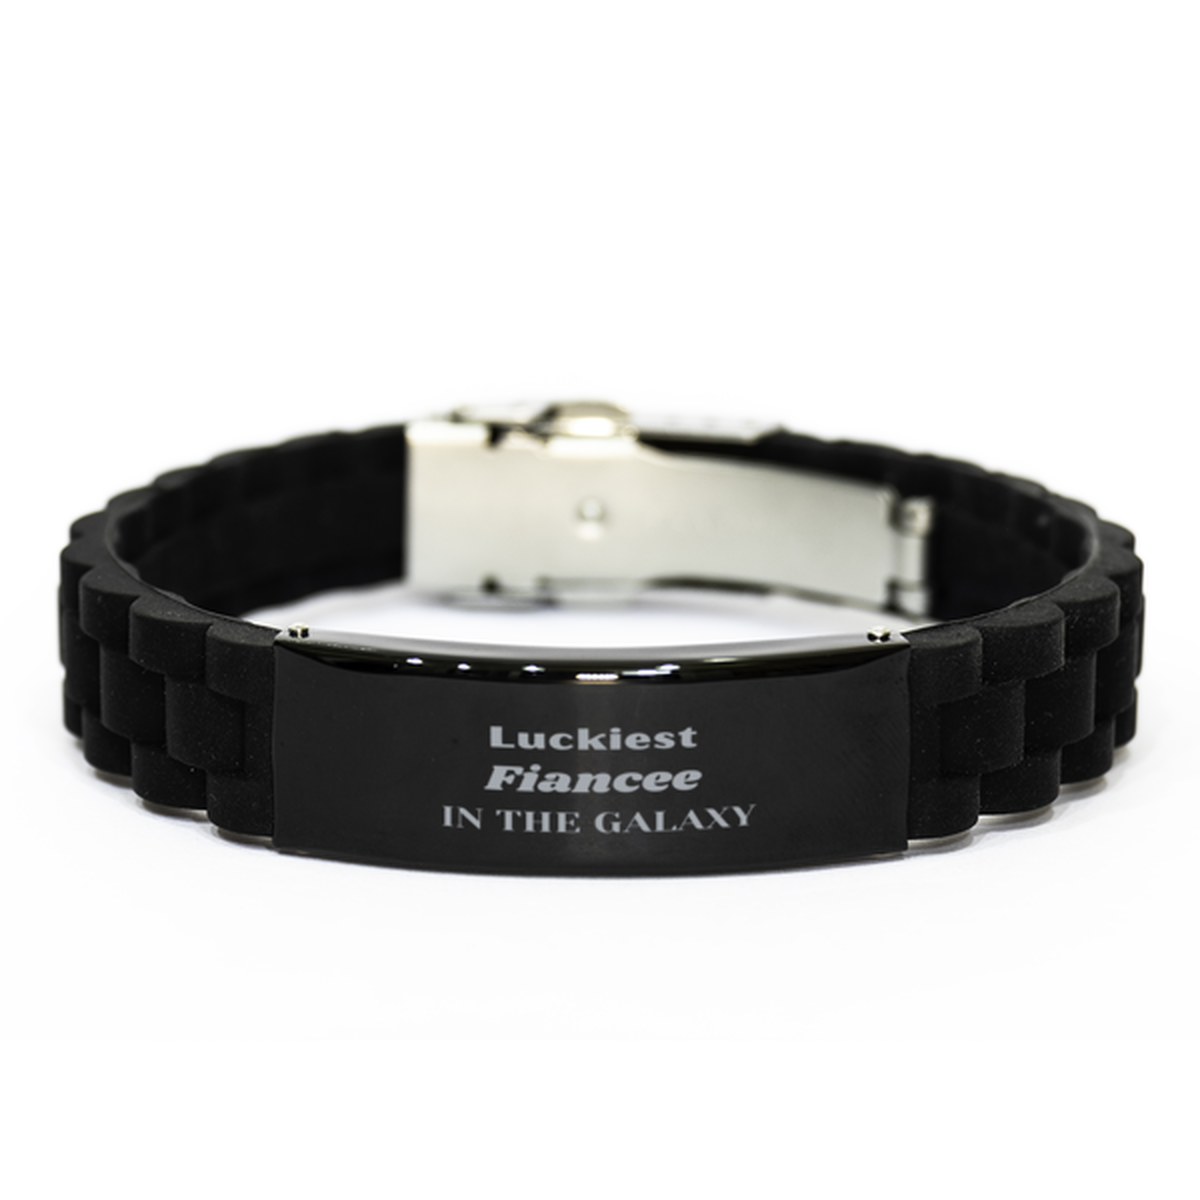 Luckiest Fiancee in the Galaxy, To My Fiancee Engraved Gifts, Christmas Fiancee Black Glidelock Clasp Bracelet Gifts, X-mas Birthday Unique Gifts For Fiancee Men Women